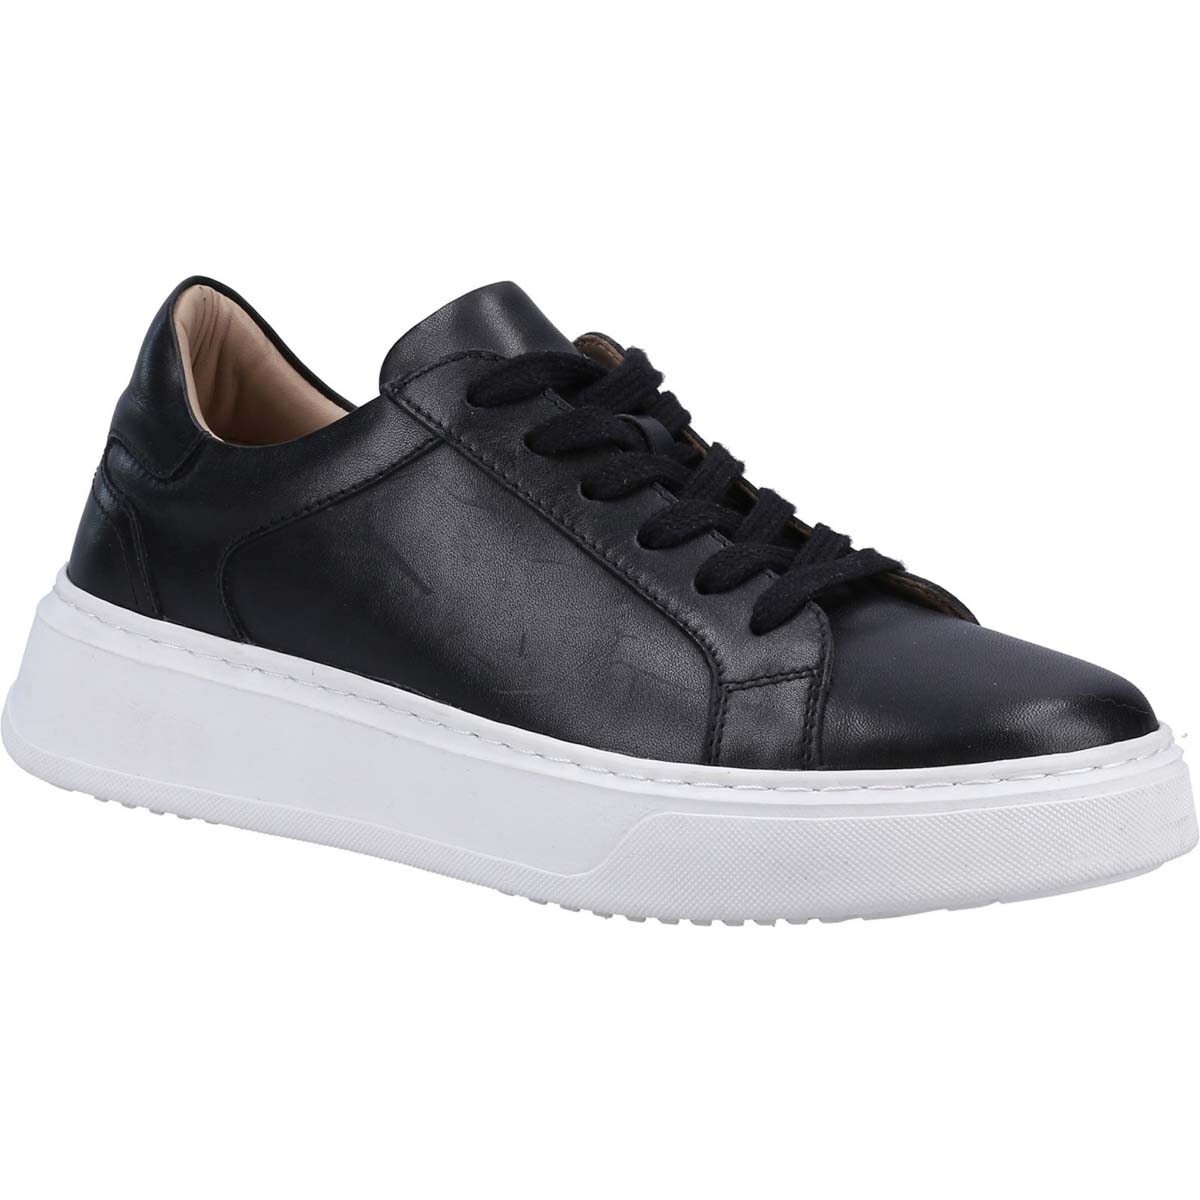 Hush Puppies Camille Black Womens trainers 36580-68191 in a Plain Leather in Size 9